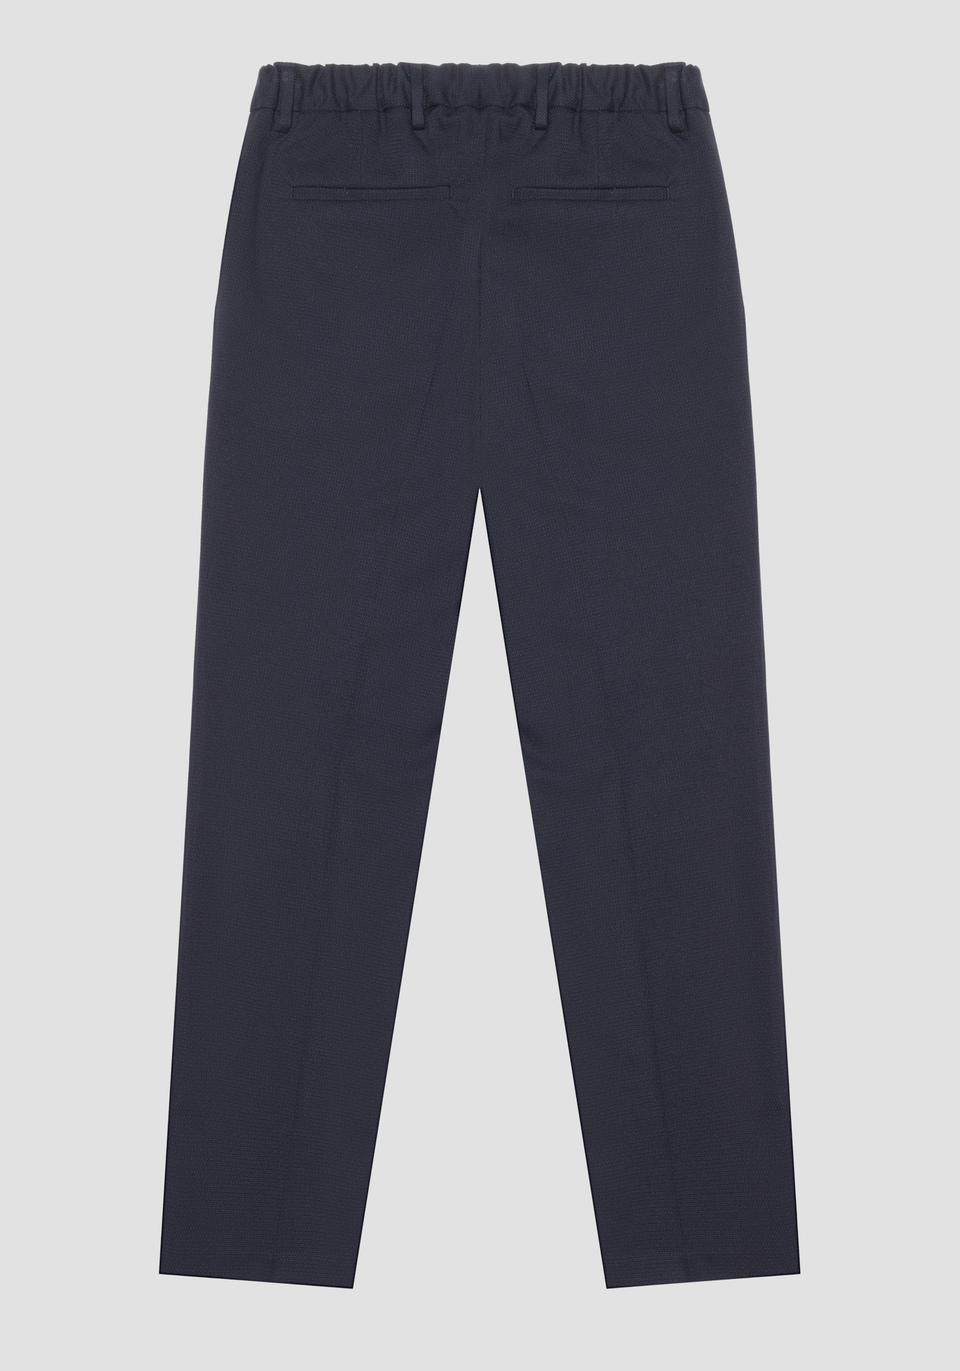 "PHIL" REGULAR STRAIGHT FIT TROUSERS IN ELASTIC VISCOSE BLEND DOBBY FABRIC - Antony Morato Online Shop